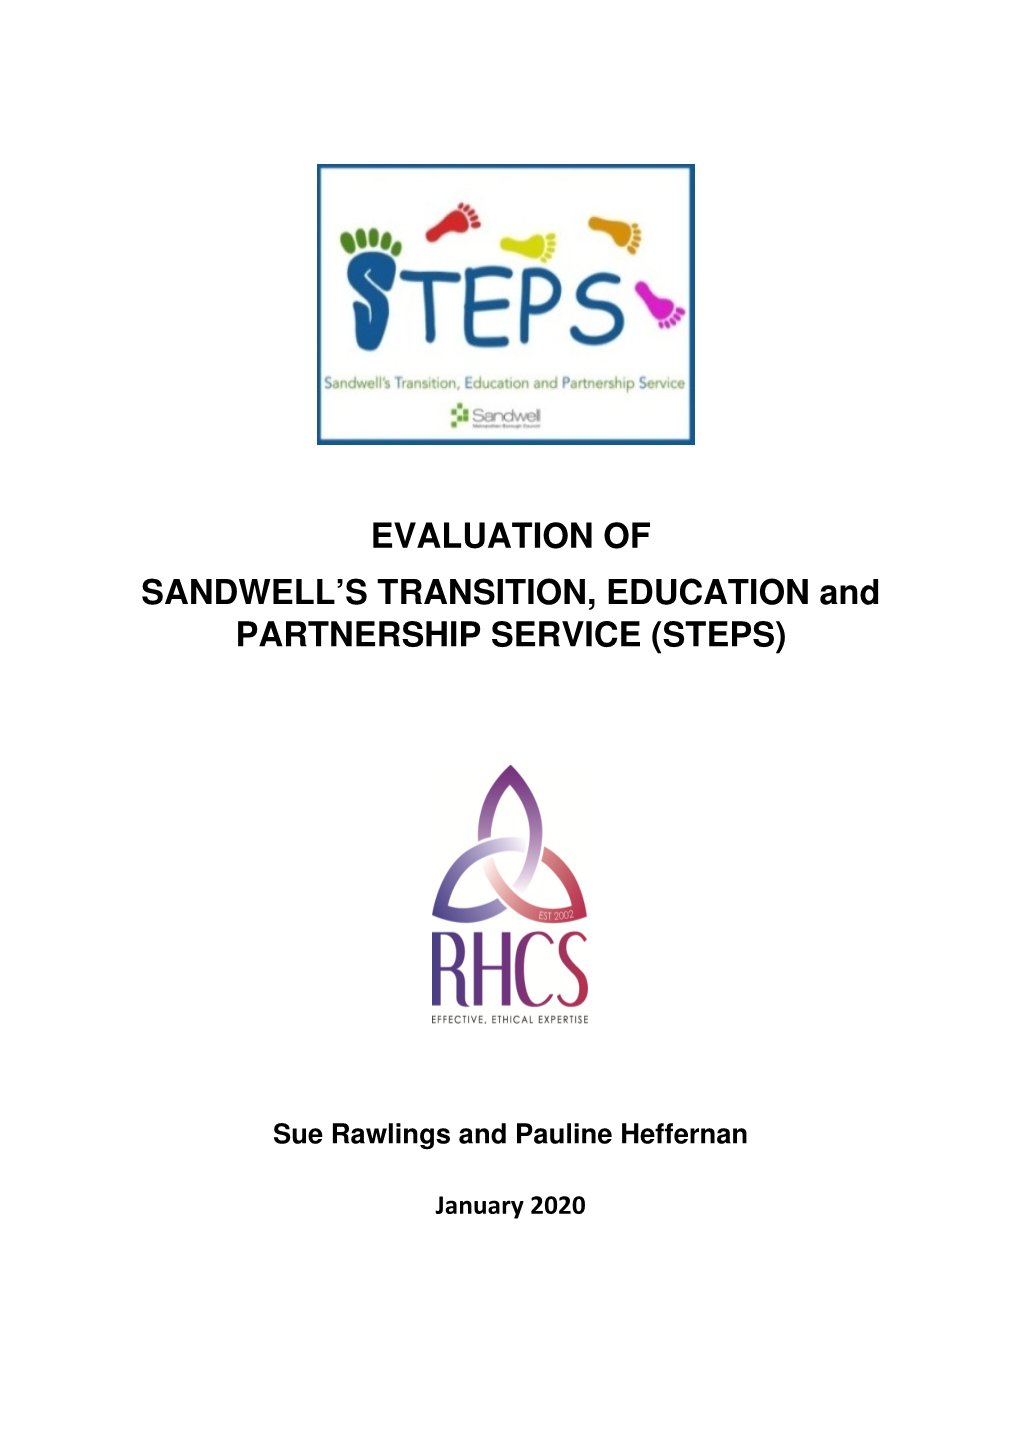 EVALUATION of SANDWELL's TRANSITION, EDUCATION And